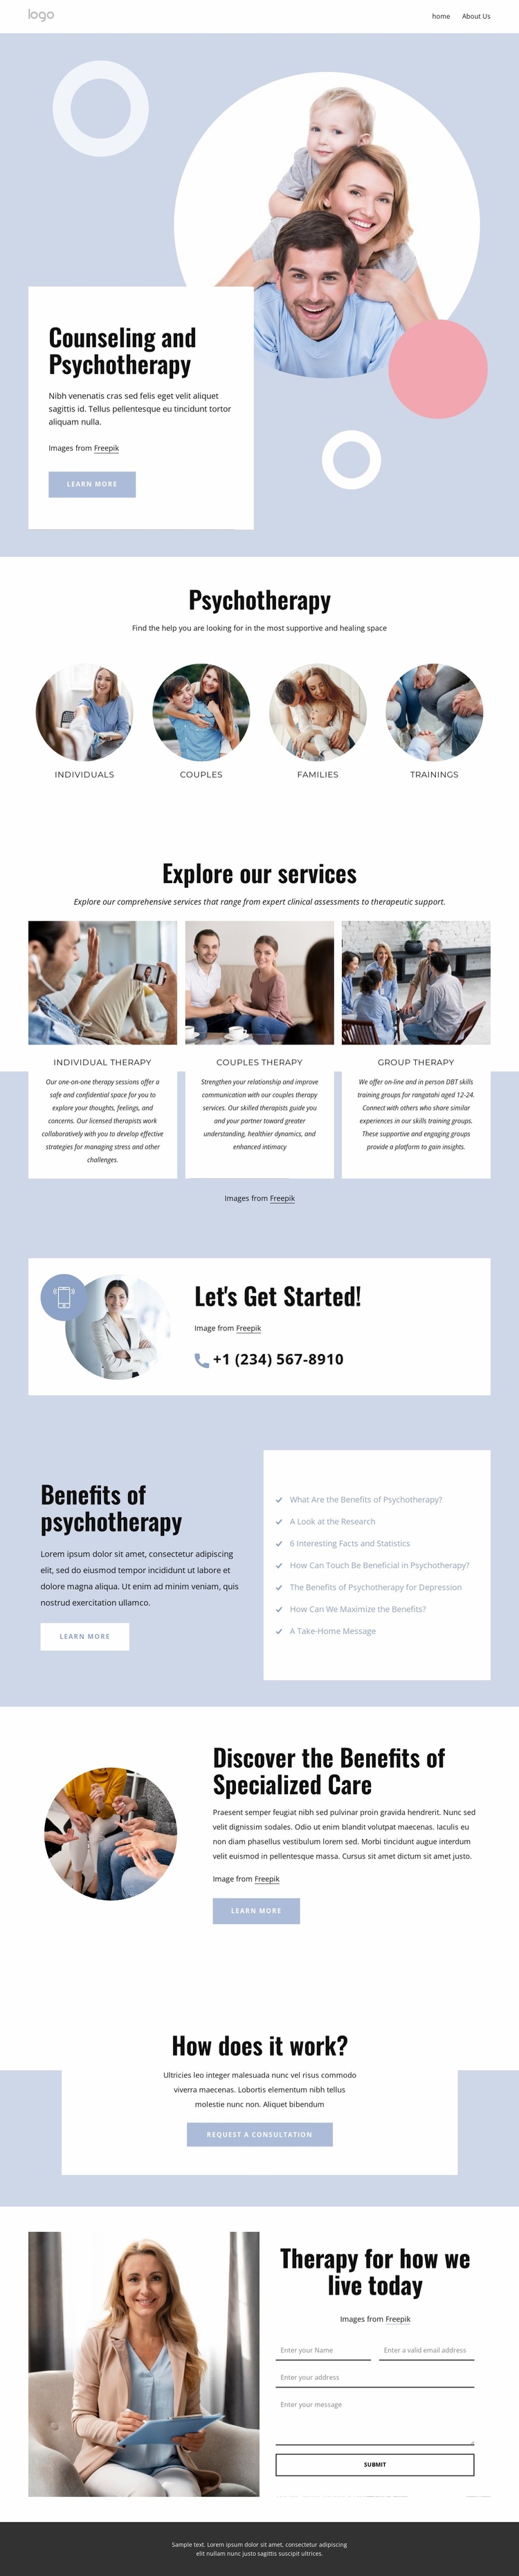 Counseling and psychotherapy Website Template